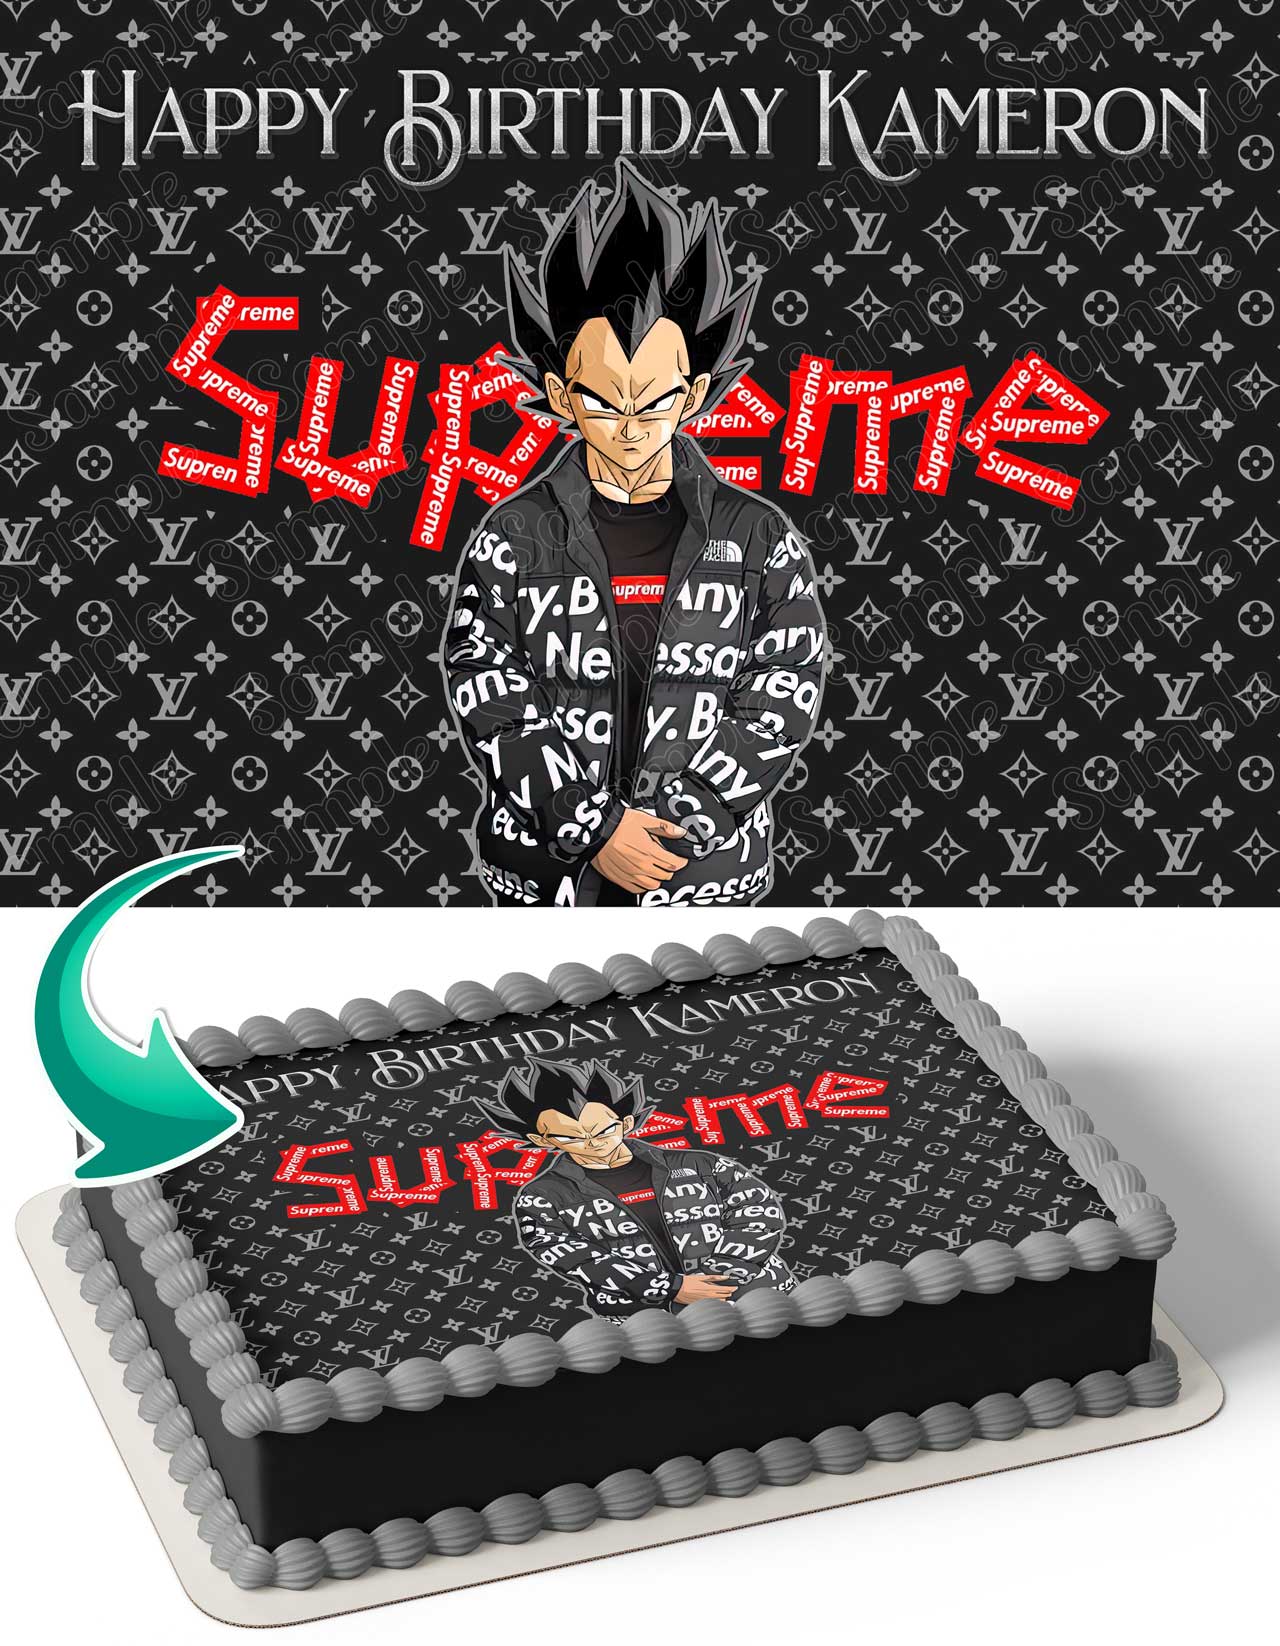 Louis Vuitton x Supreme Edible Image Cake Topper Personalized Birthday  Sheet Decoration Custom Party Frosting Transfer Fondant